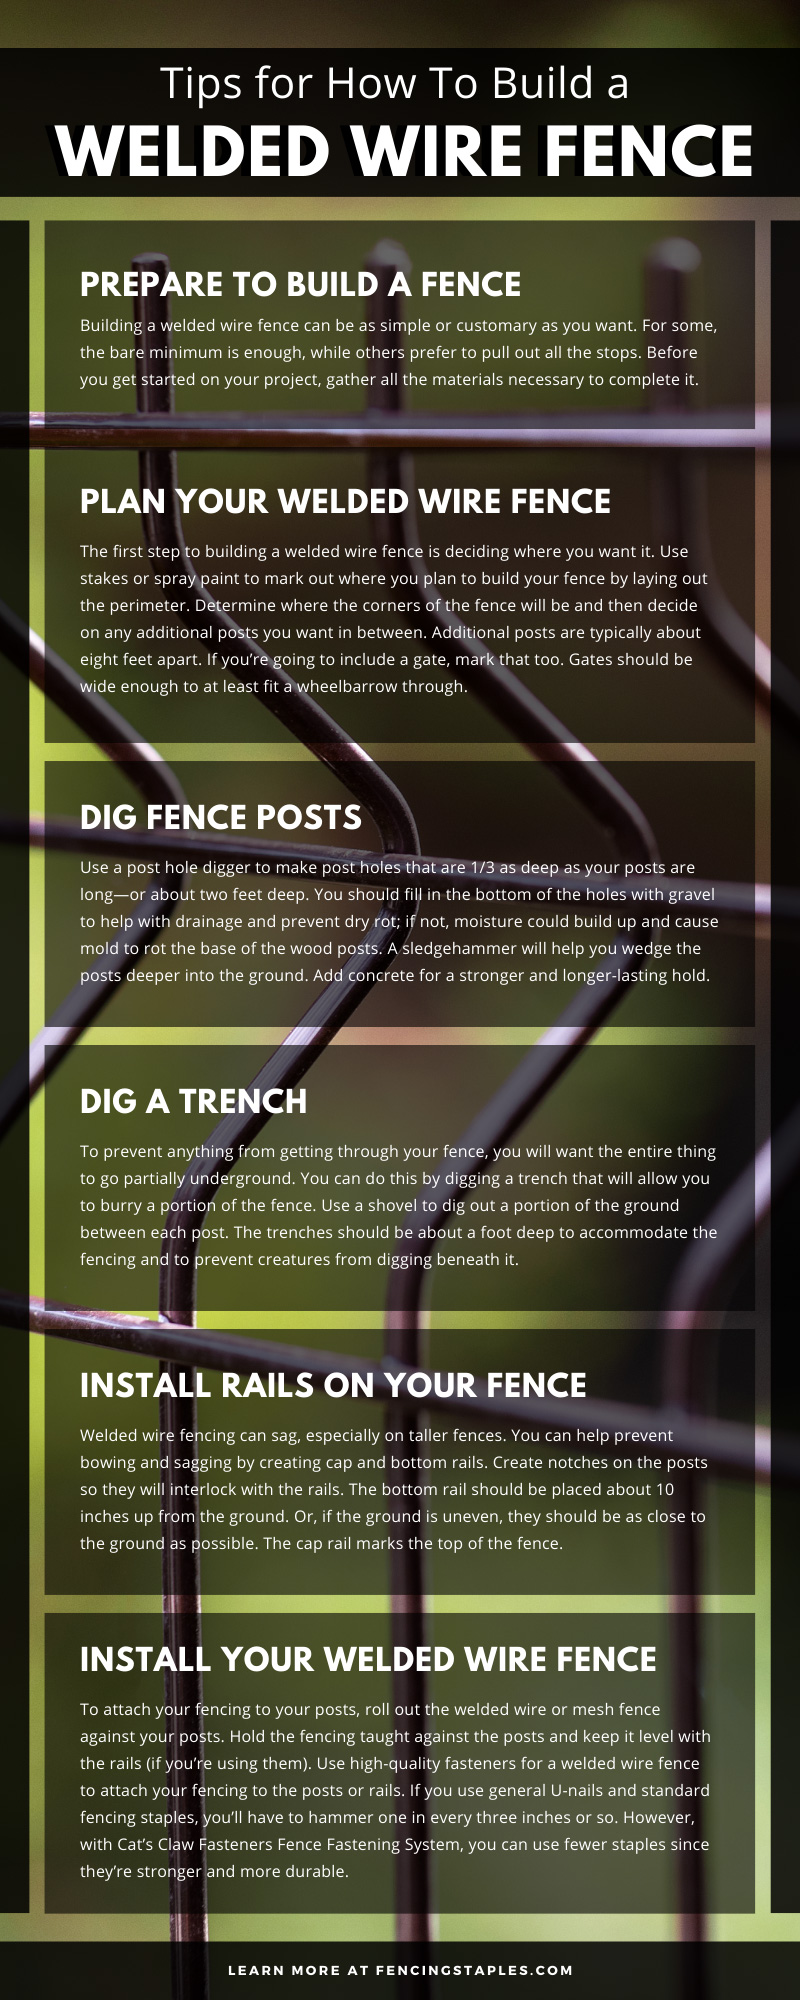 Tips for How To Build a Welded Wire Fence